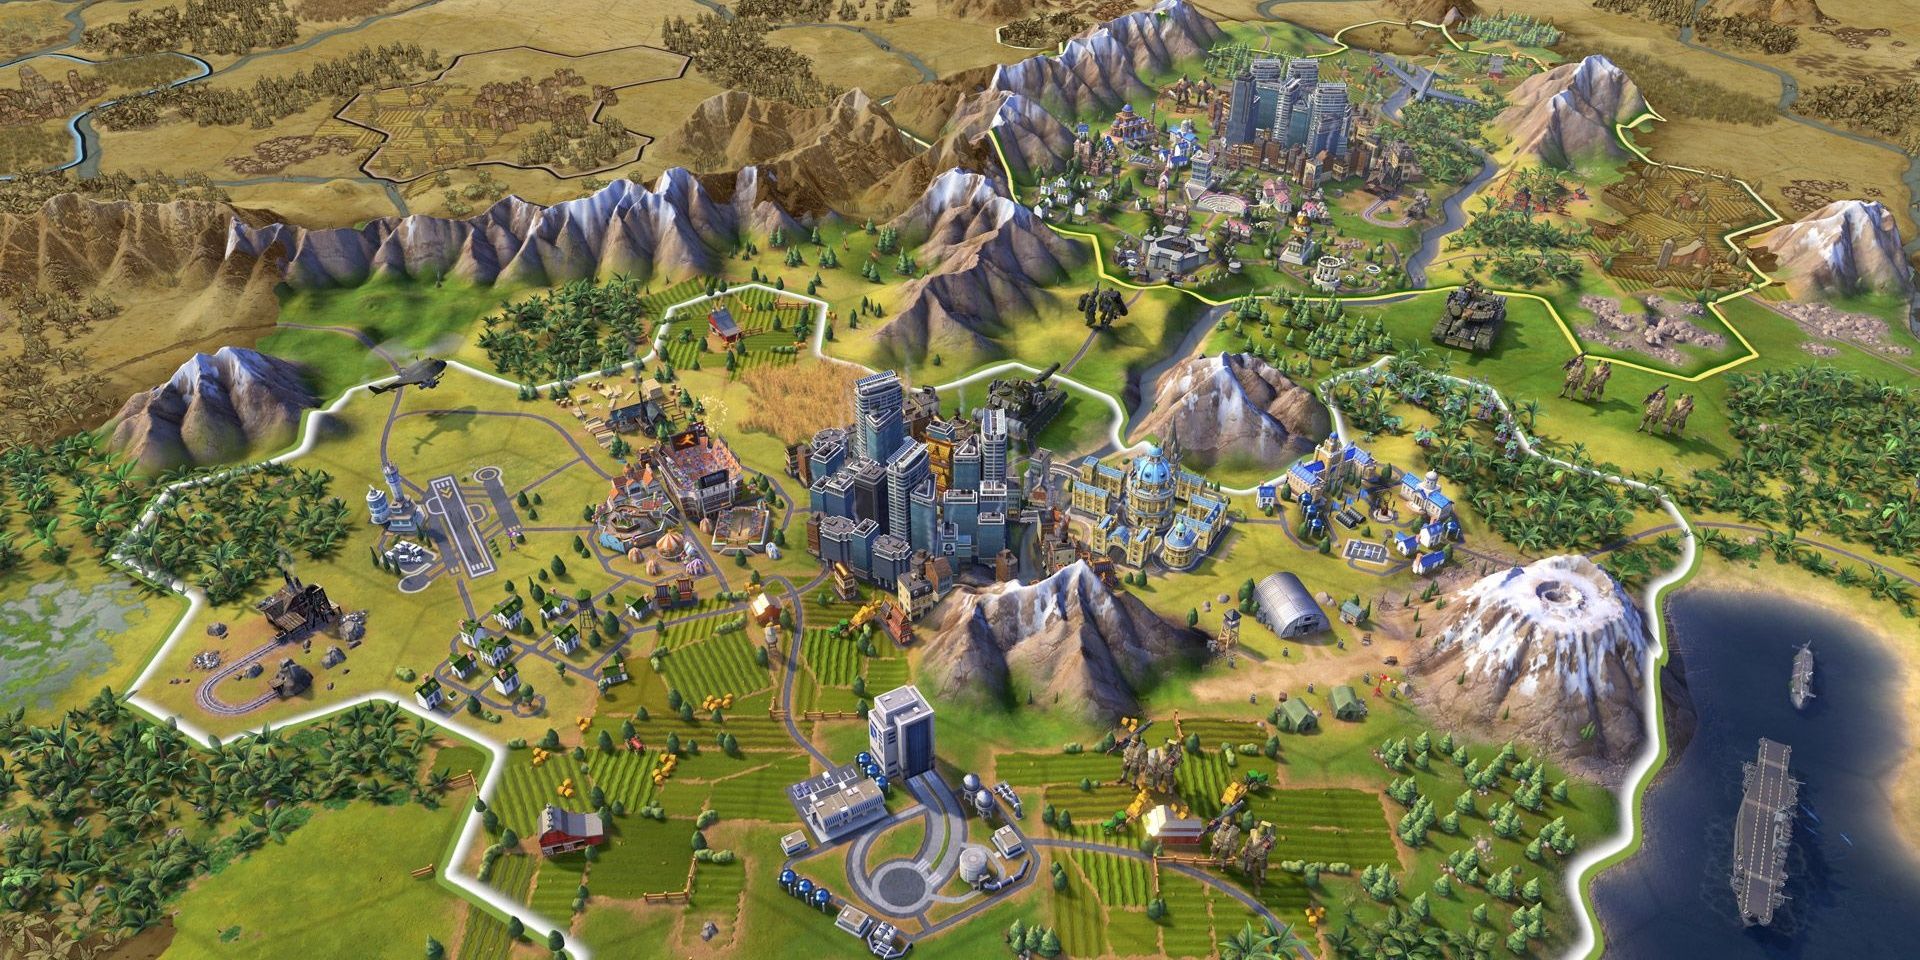 The beginnings of a society in Civilization VI